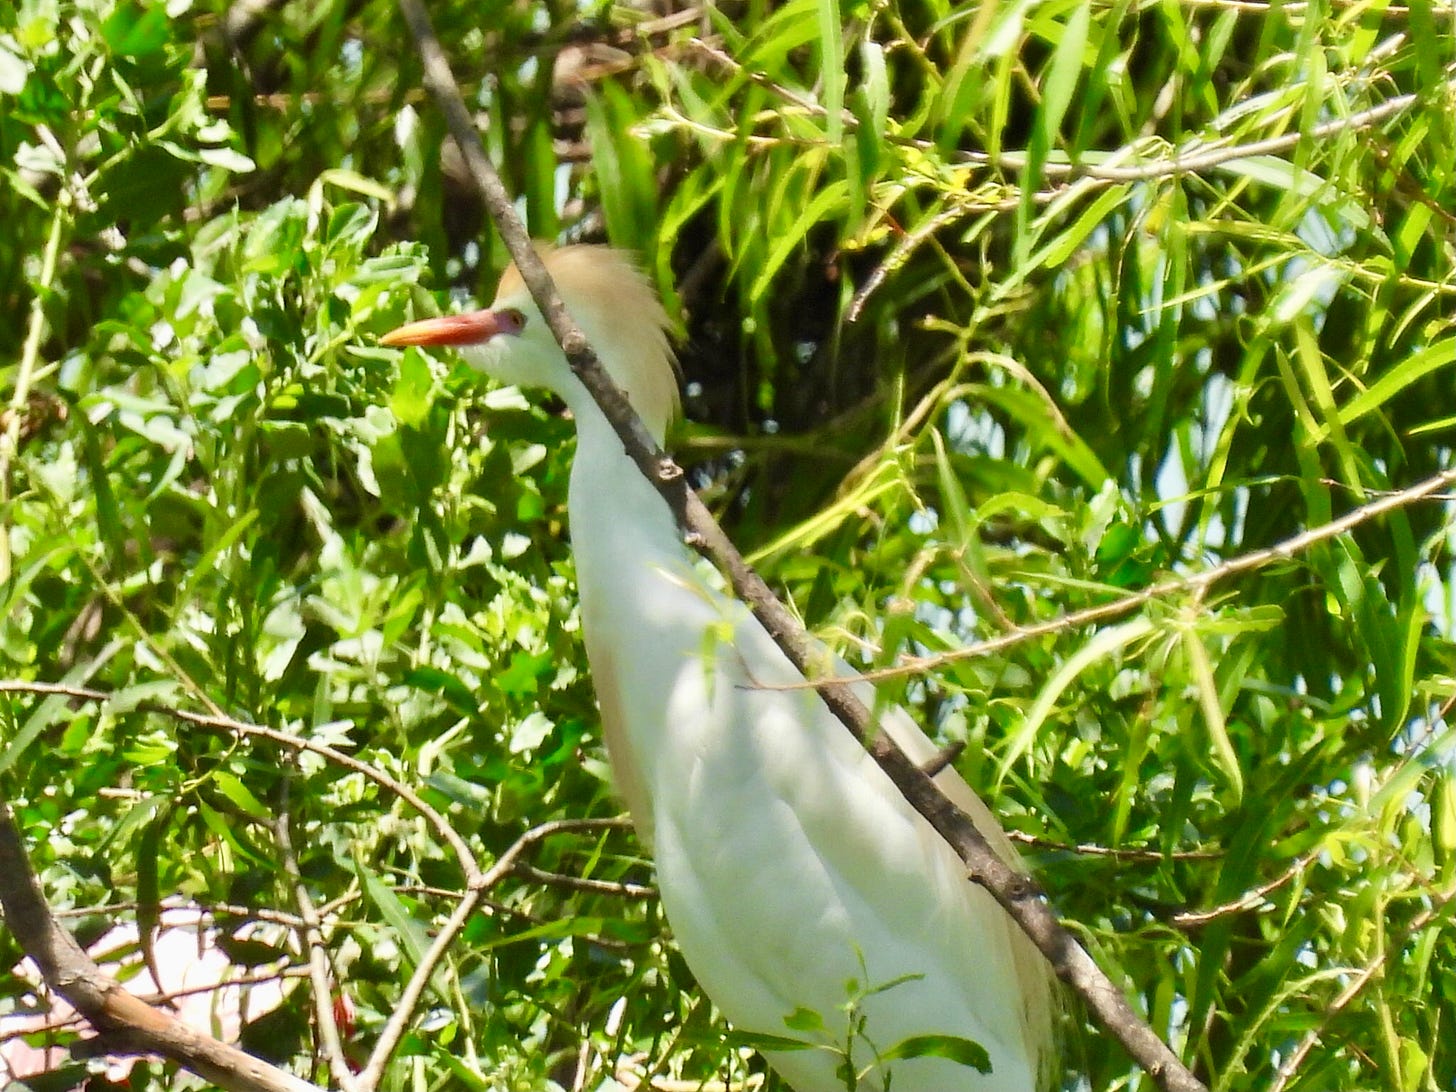 A small white egret stands in a tree with long slender green leaves. It has a thick reddish bill and pale orange plumes on its crown, chest, and back.